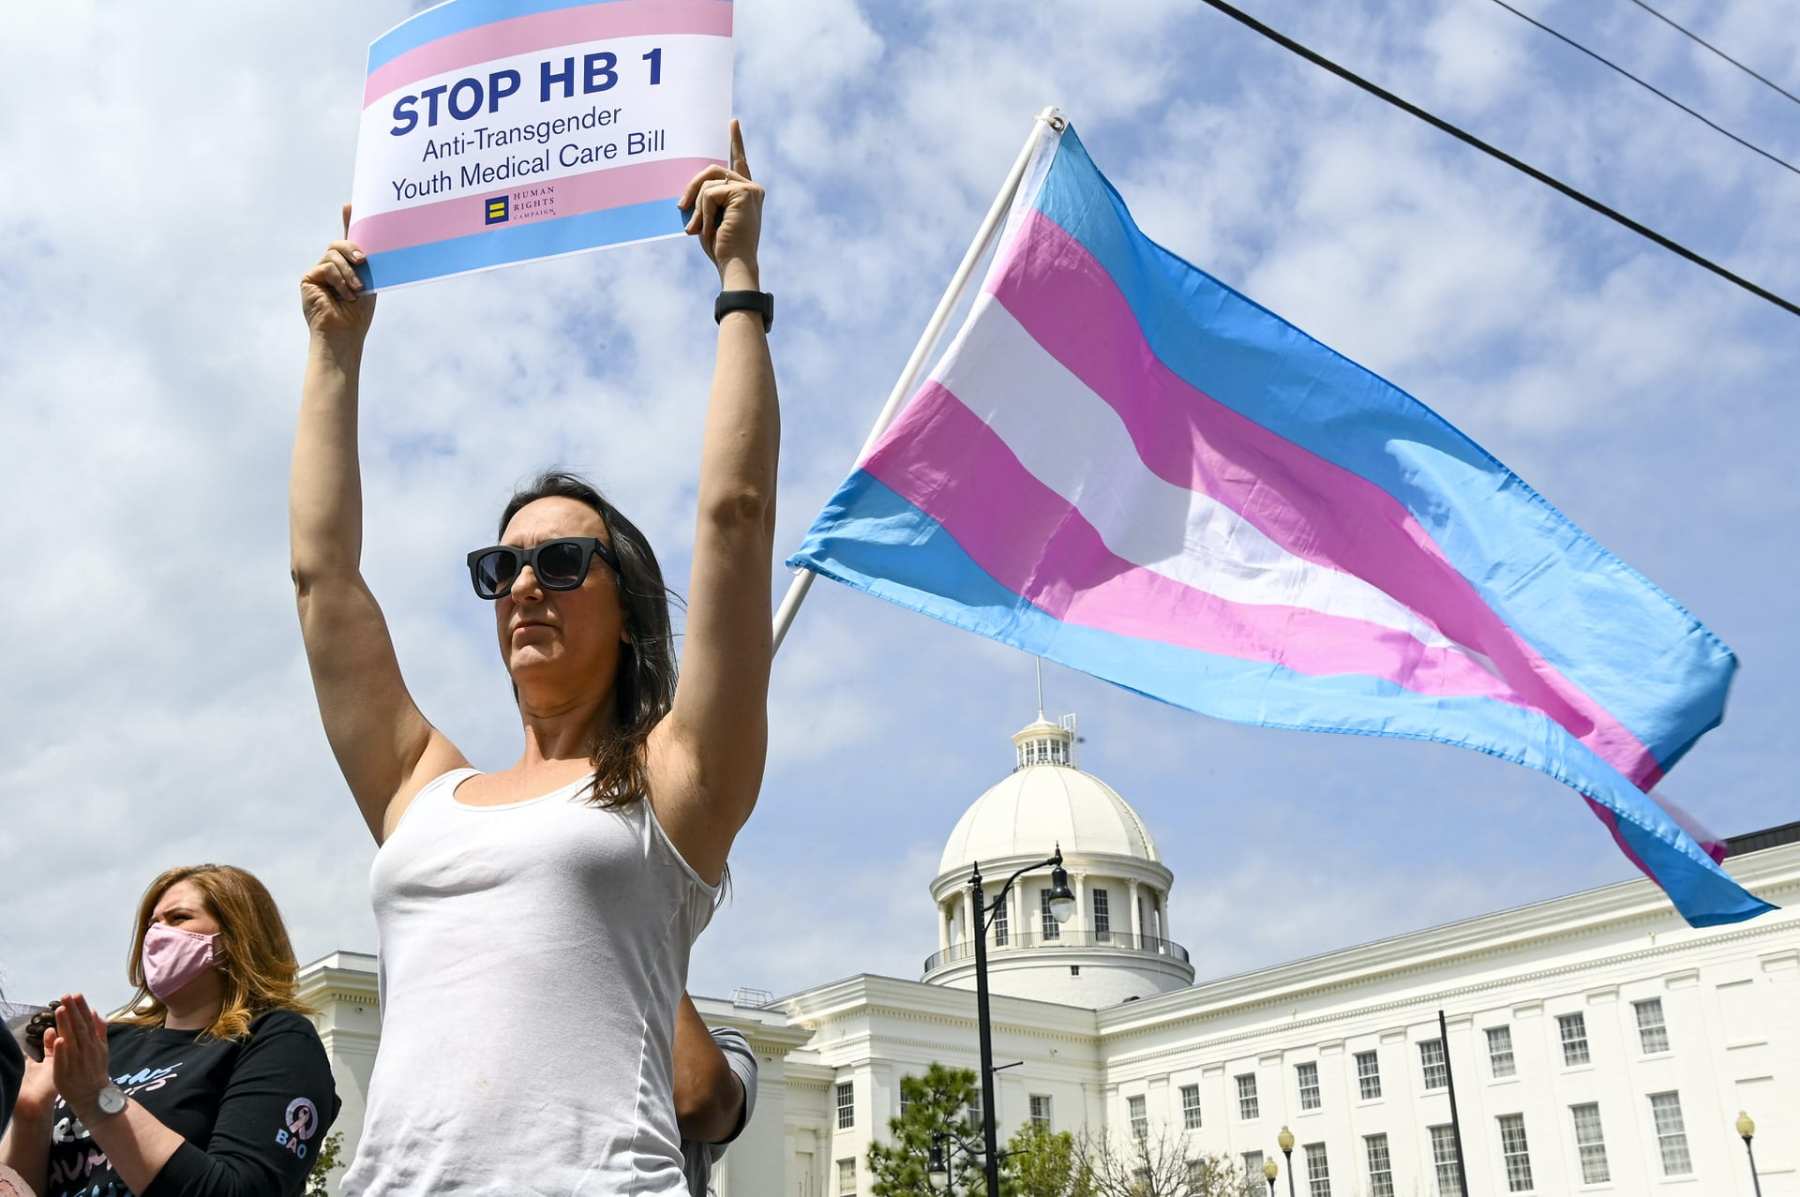 A woman holds a sign reading "Stop HB1" during a rally at the Alabama State House to draw attention to anti-transgender legislation introduced in Alabama on March 30, 2021 in Montgomery, Alabama. There are so far 192 anti-LGBTQ bills under consideration in state legislatures across the United States. Of those, 93 directly target transgender people.